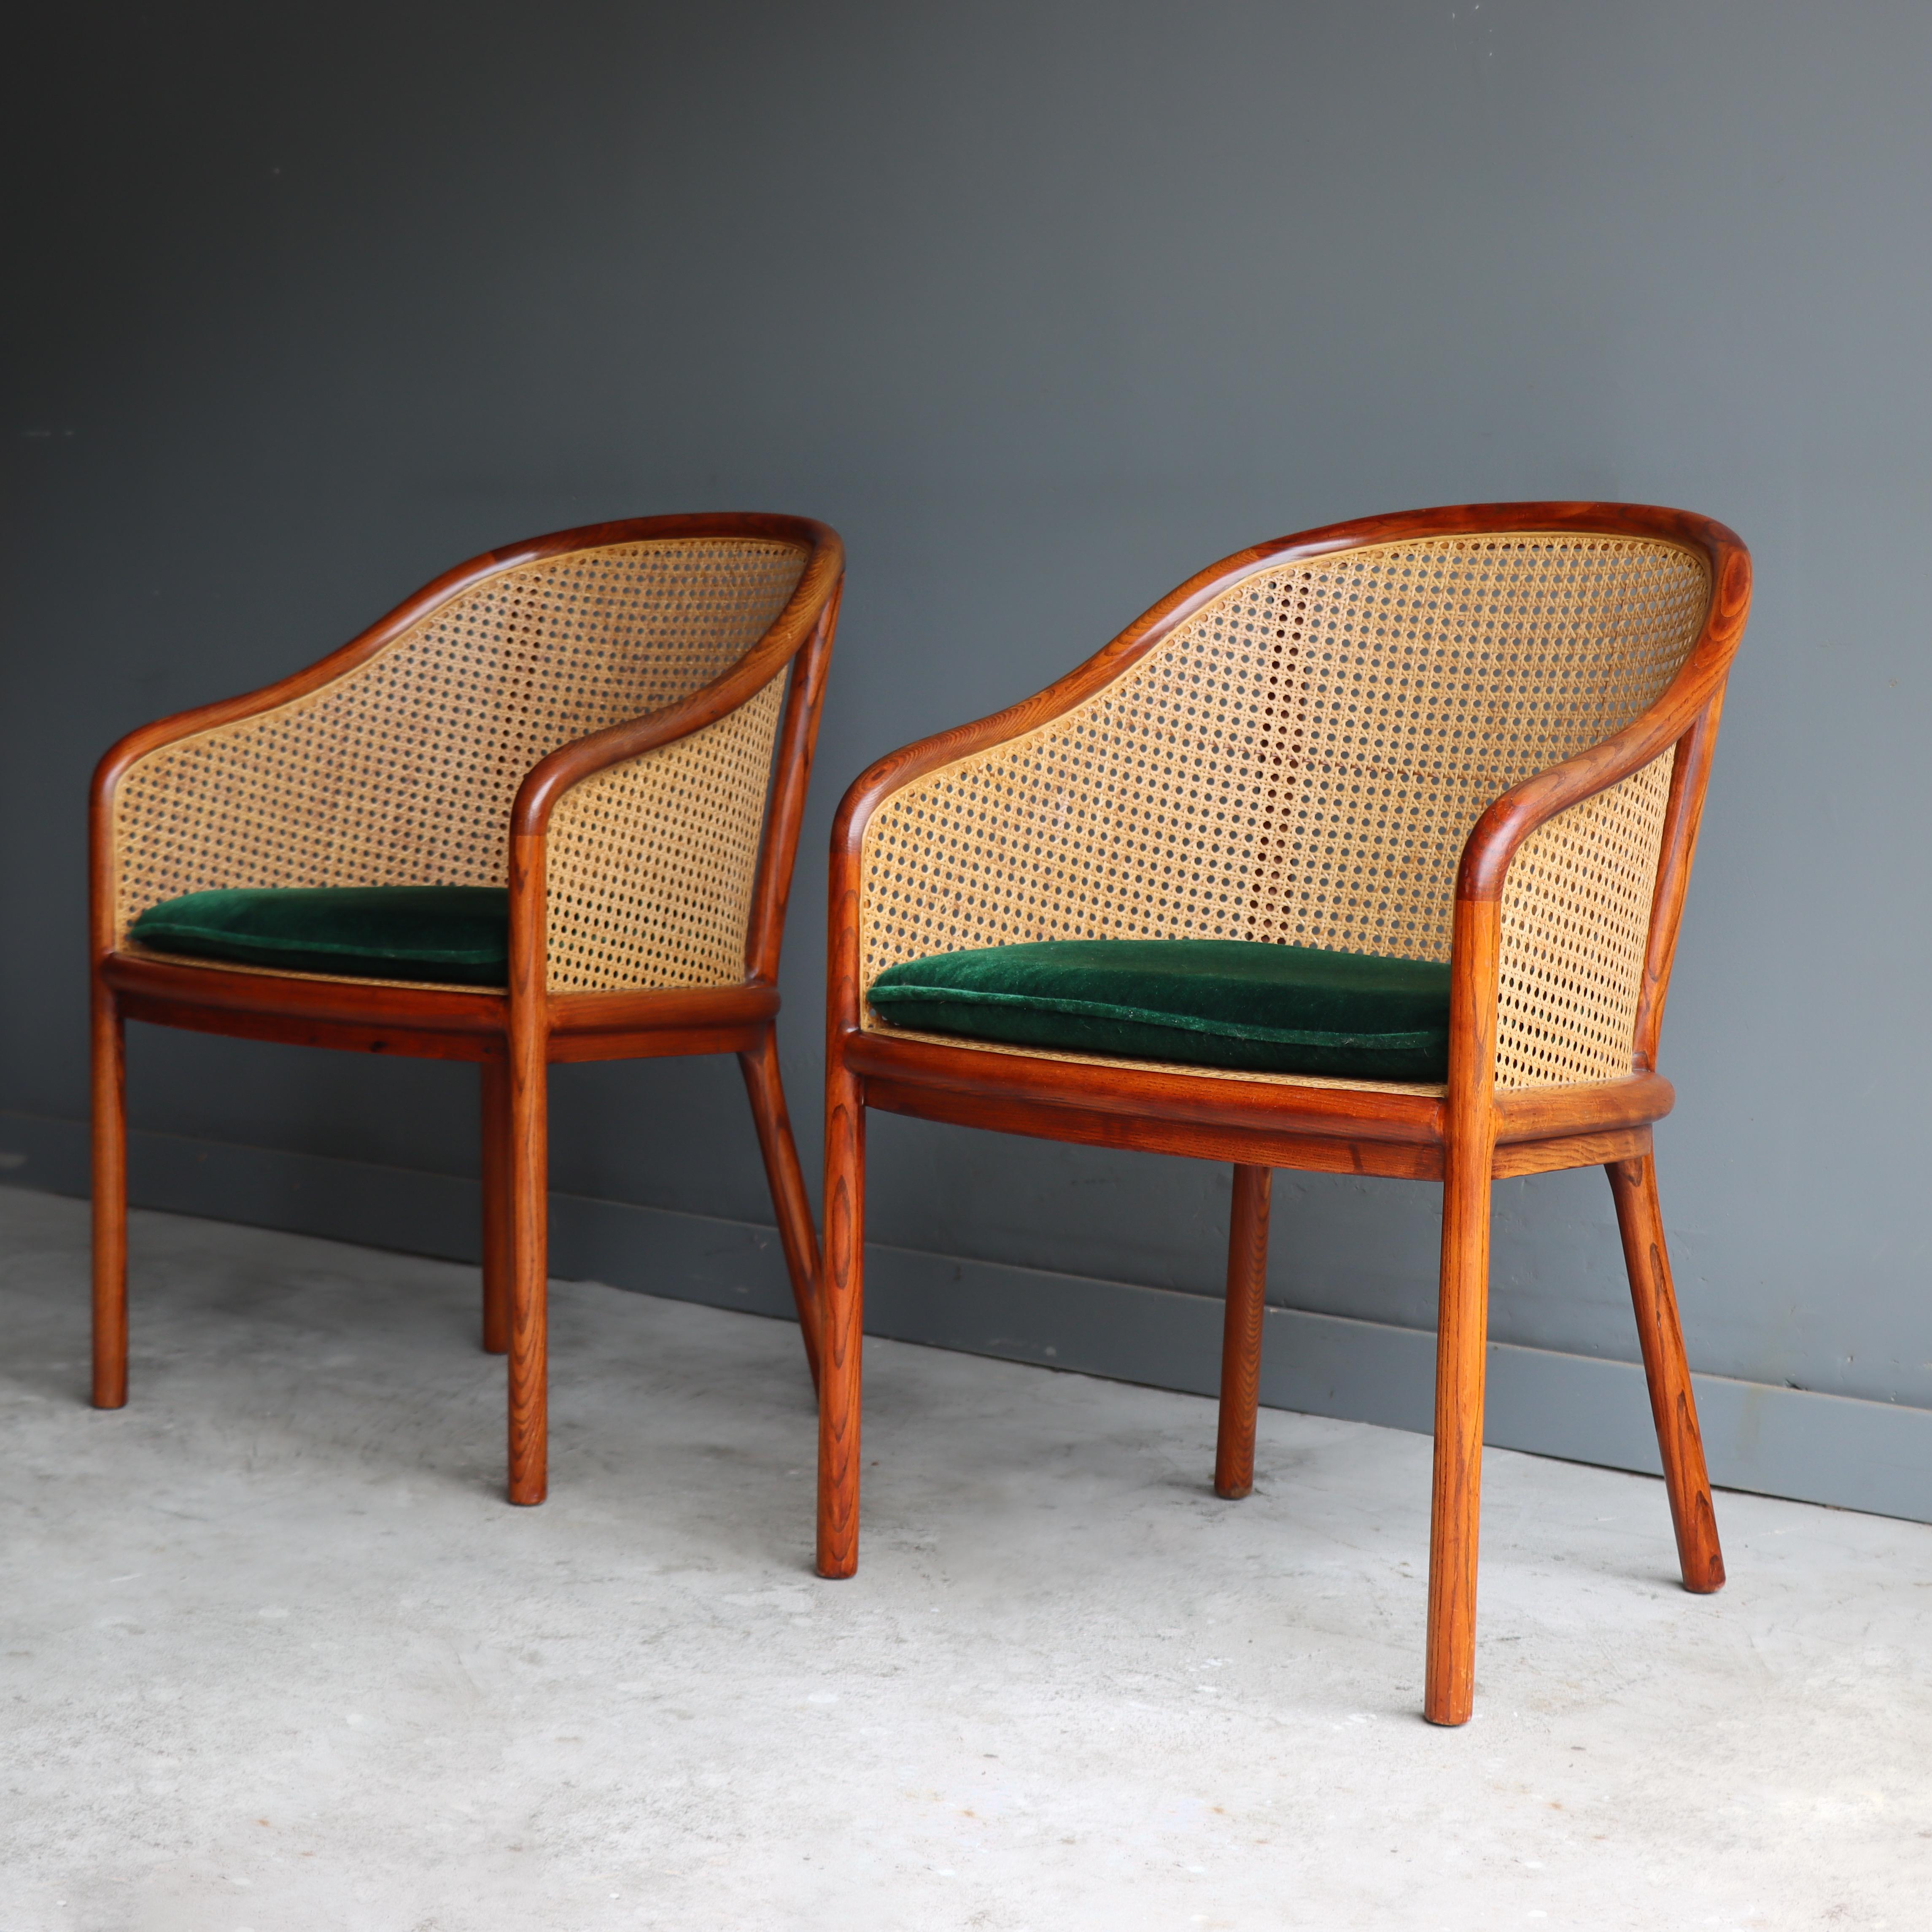 Vintage Pair of ‘Landmark’ Cane Chairs by Ward Bennett for Brickel, 1970, Mohair In Good Condition For Sale In Round Rock, TX